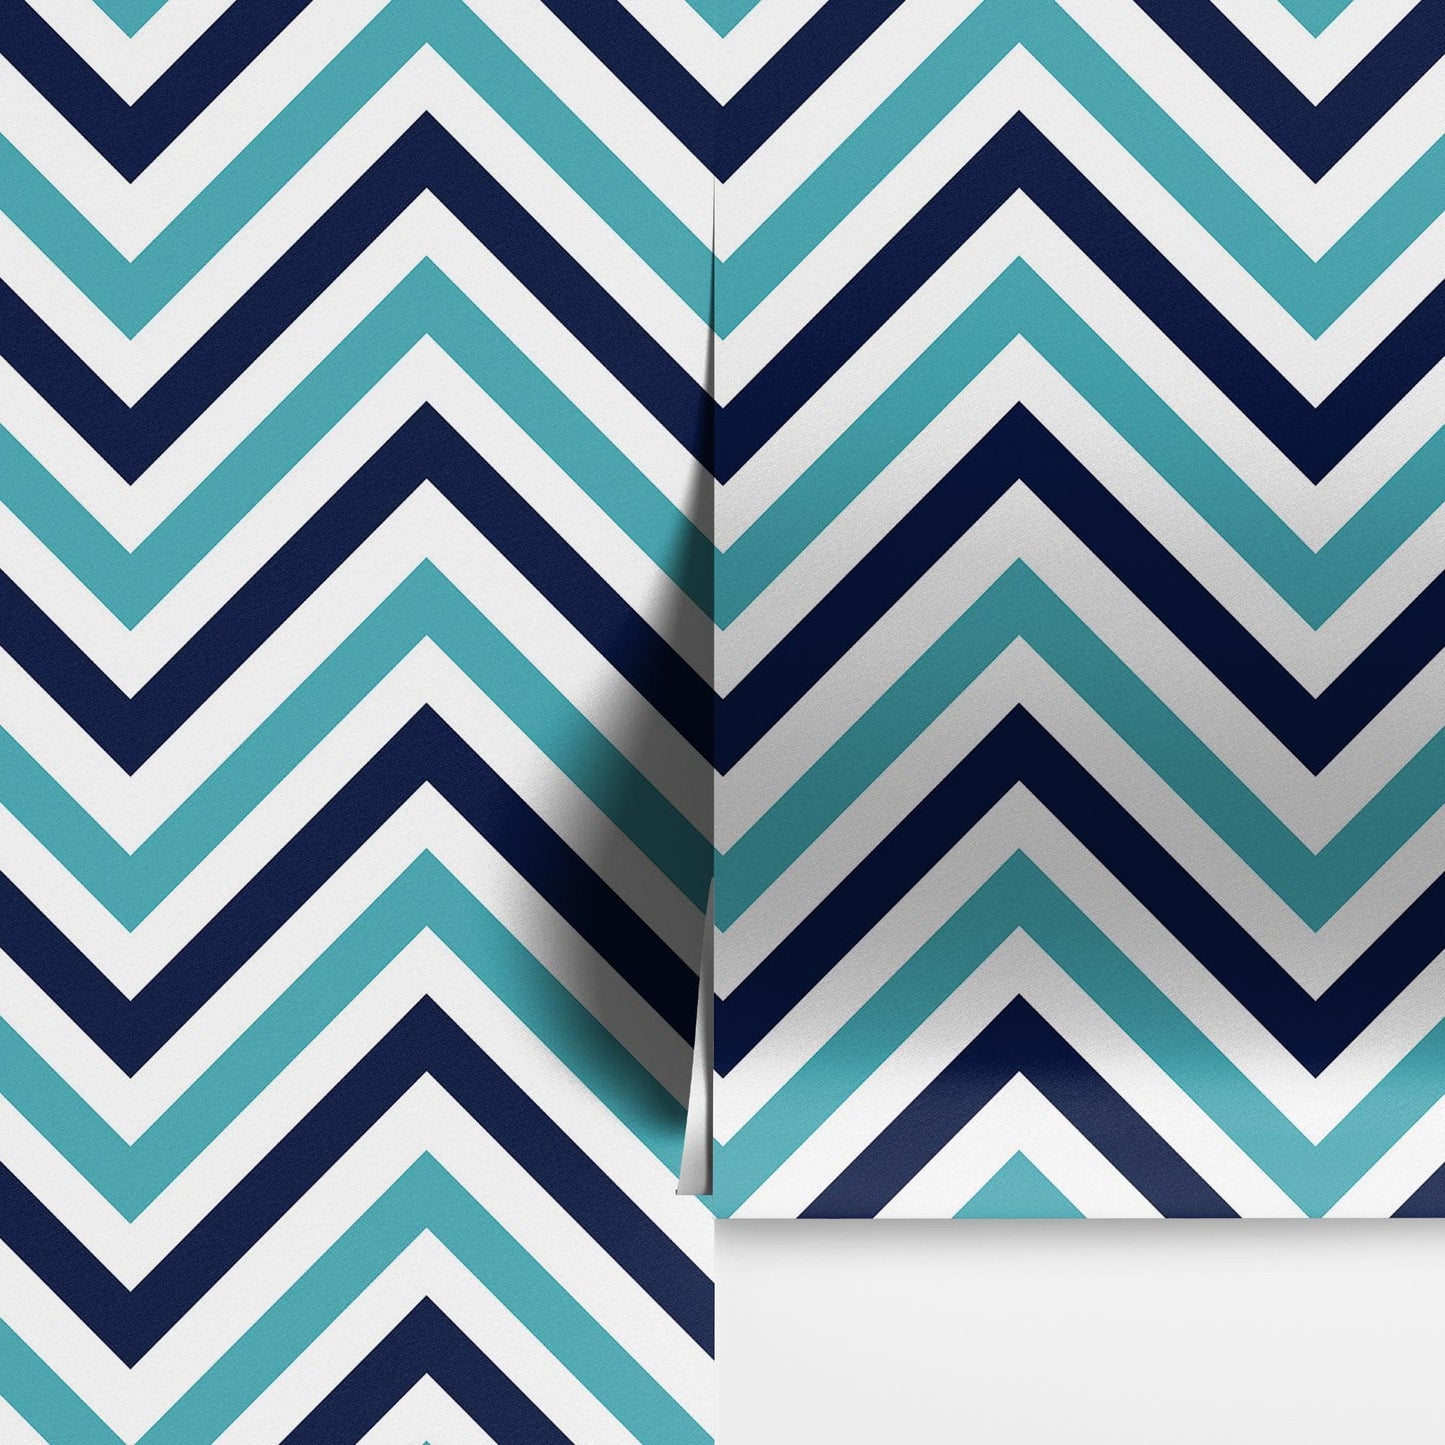 Seaside Chic Decor. Navy Blue and Teal Chevron Pattern Wallpaper. #6222